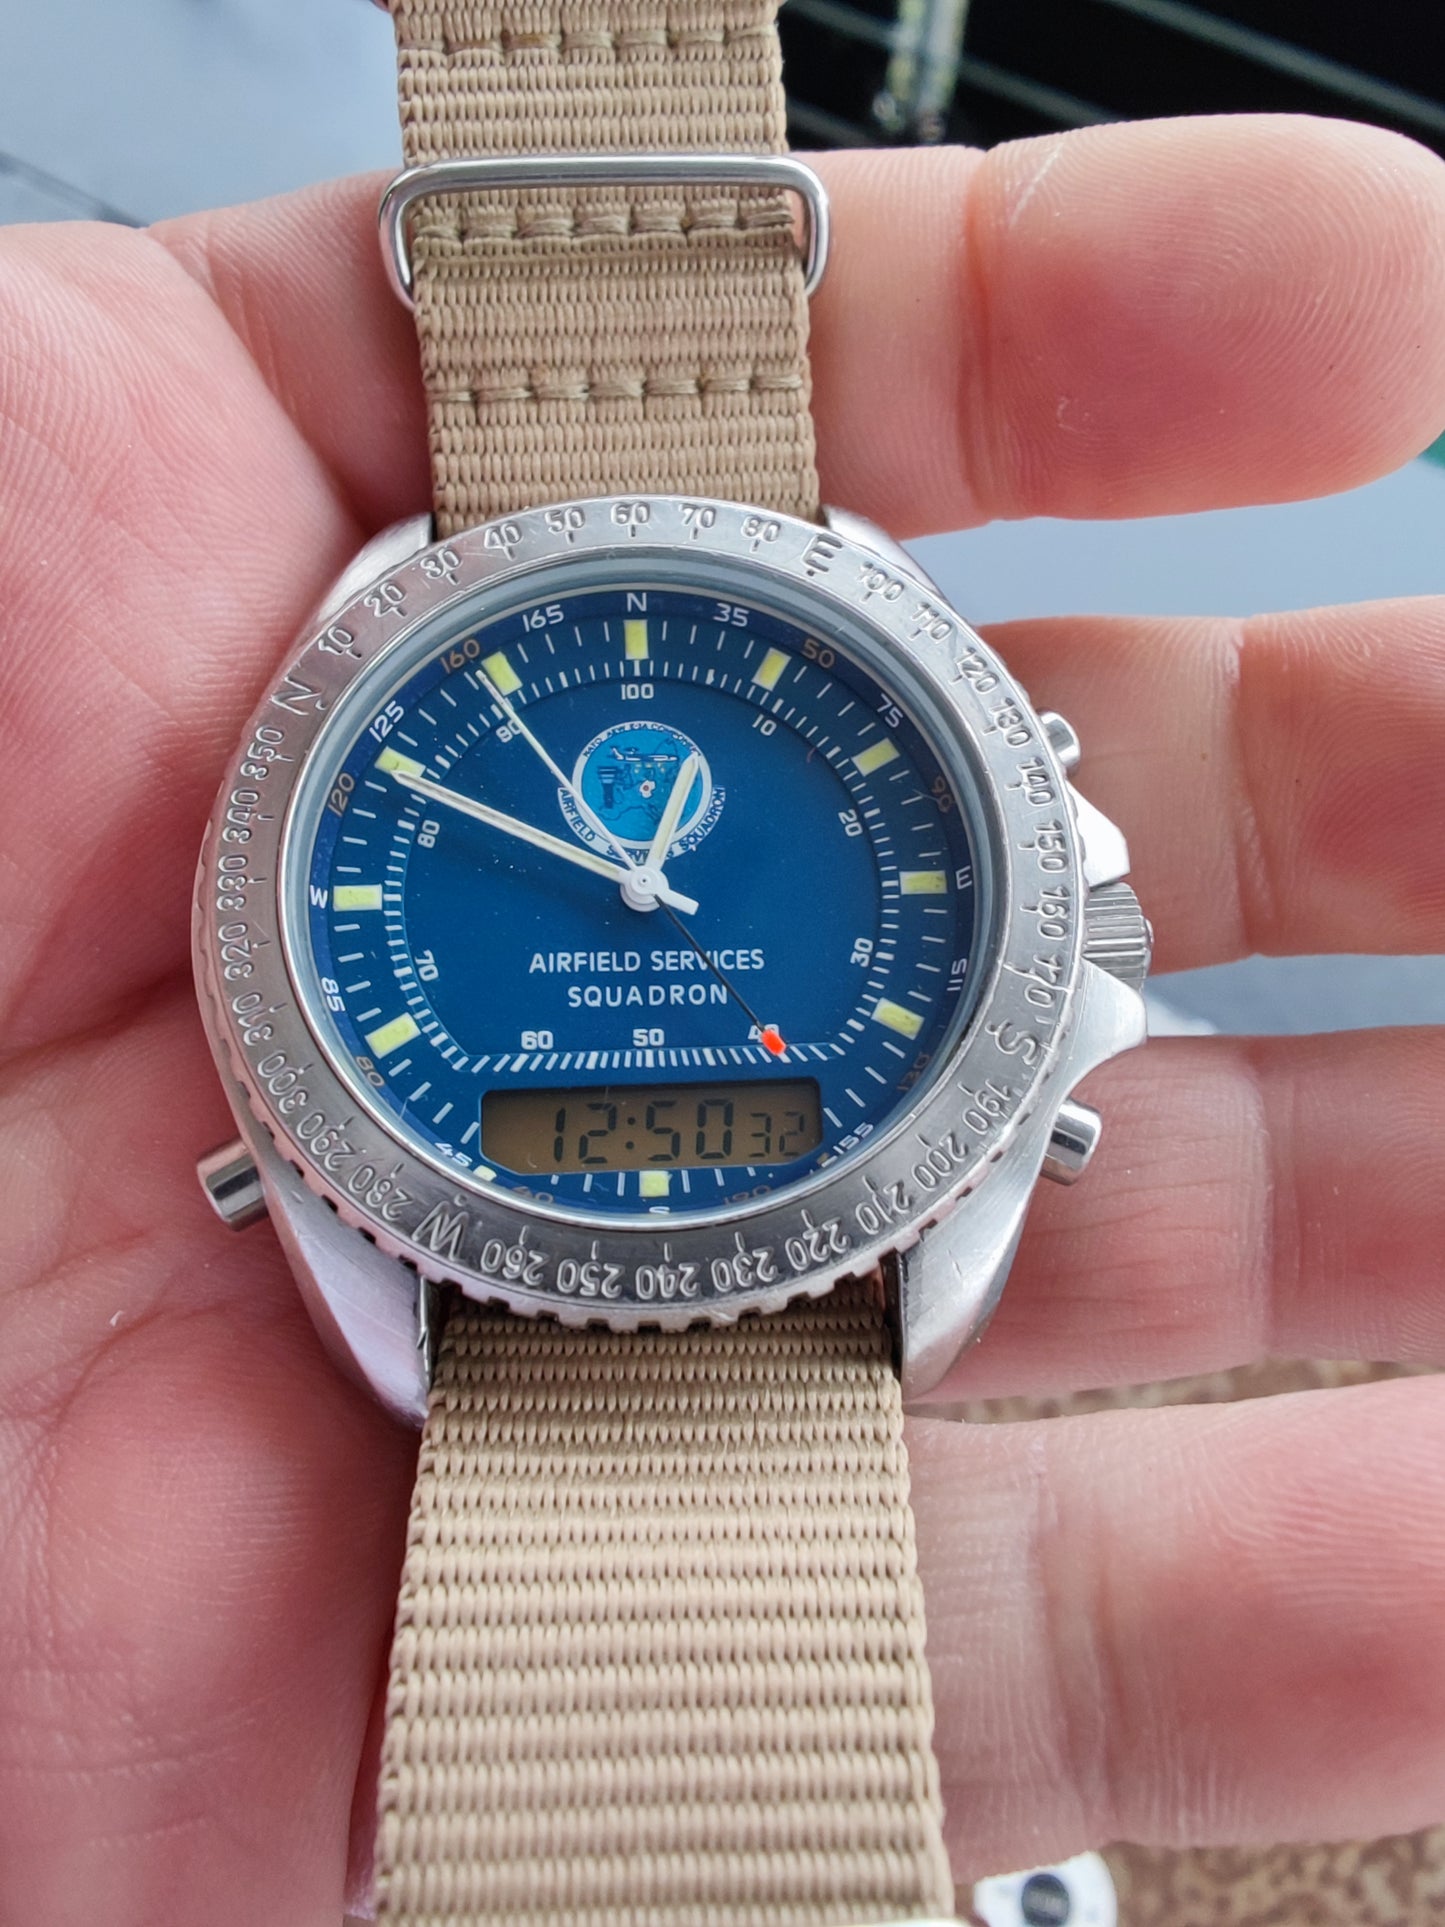 NATO Breitling PLUTON Airfield Service Squadron Military watch - Service FEB 2024